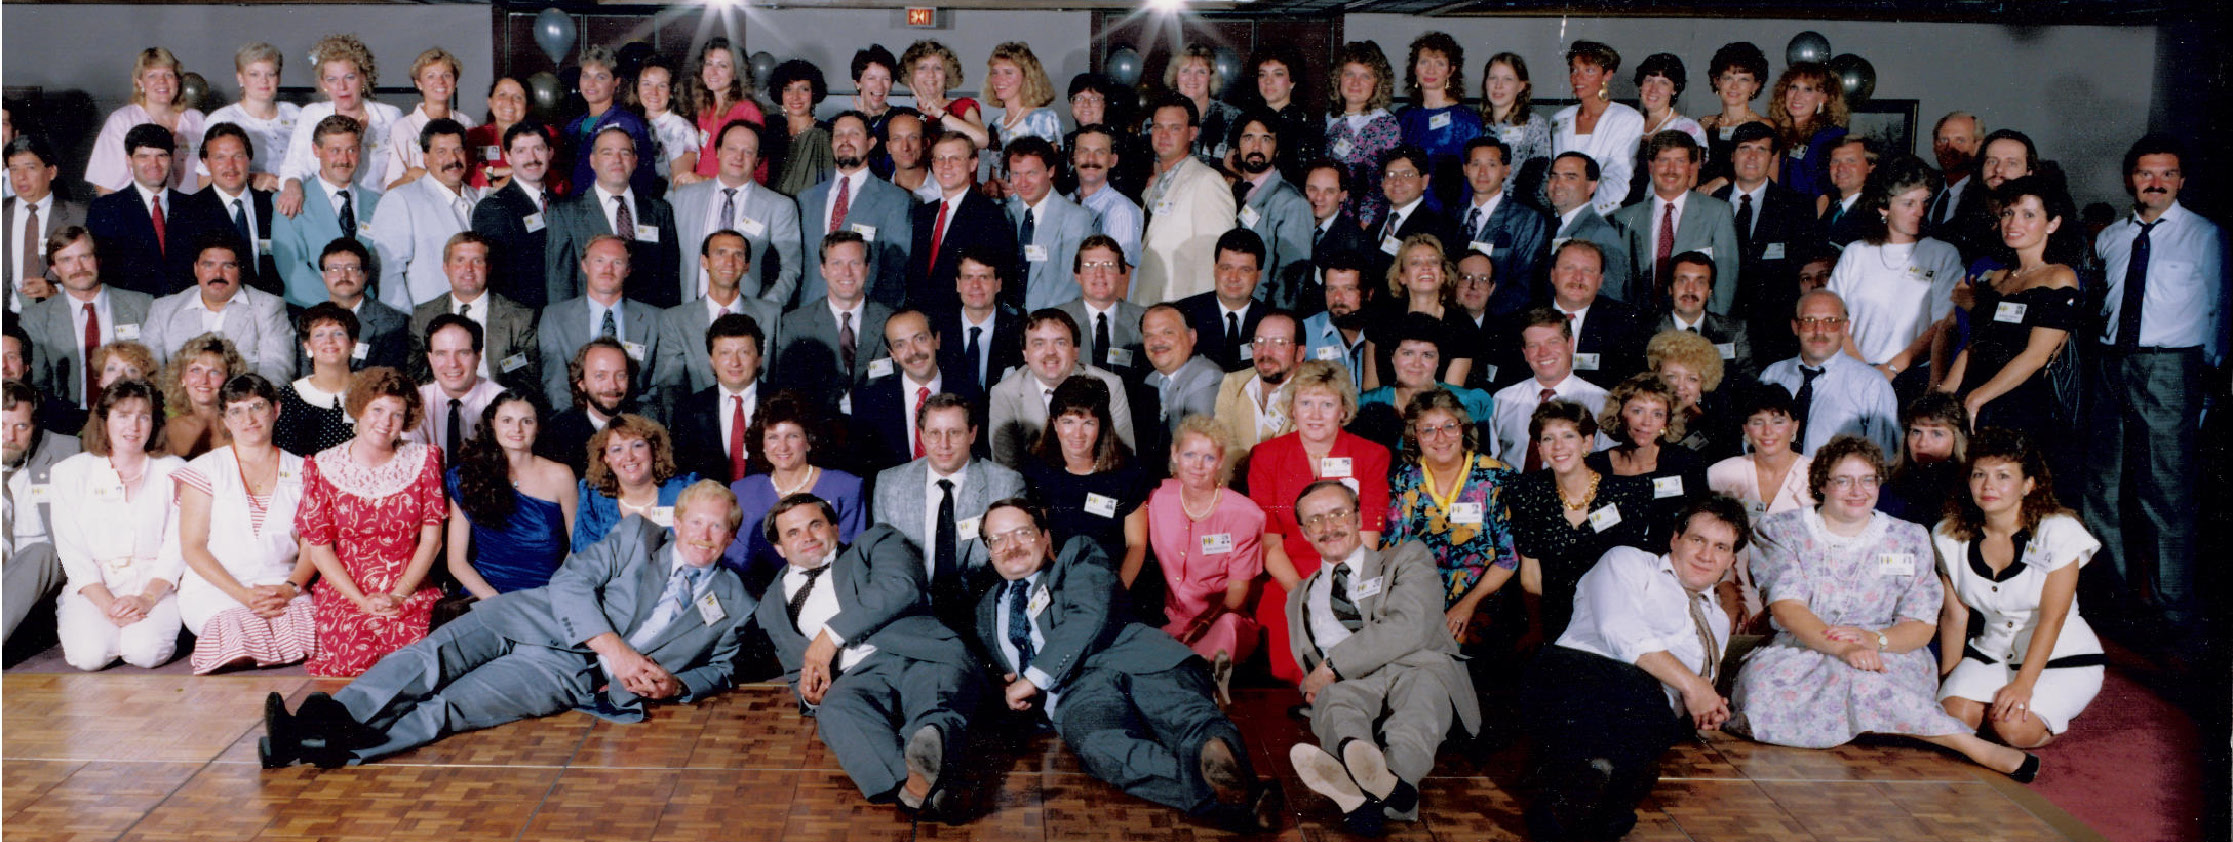 FVHS Class of 1970
20 Year Reunion in 1990